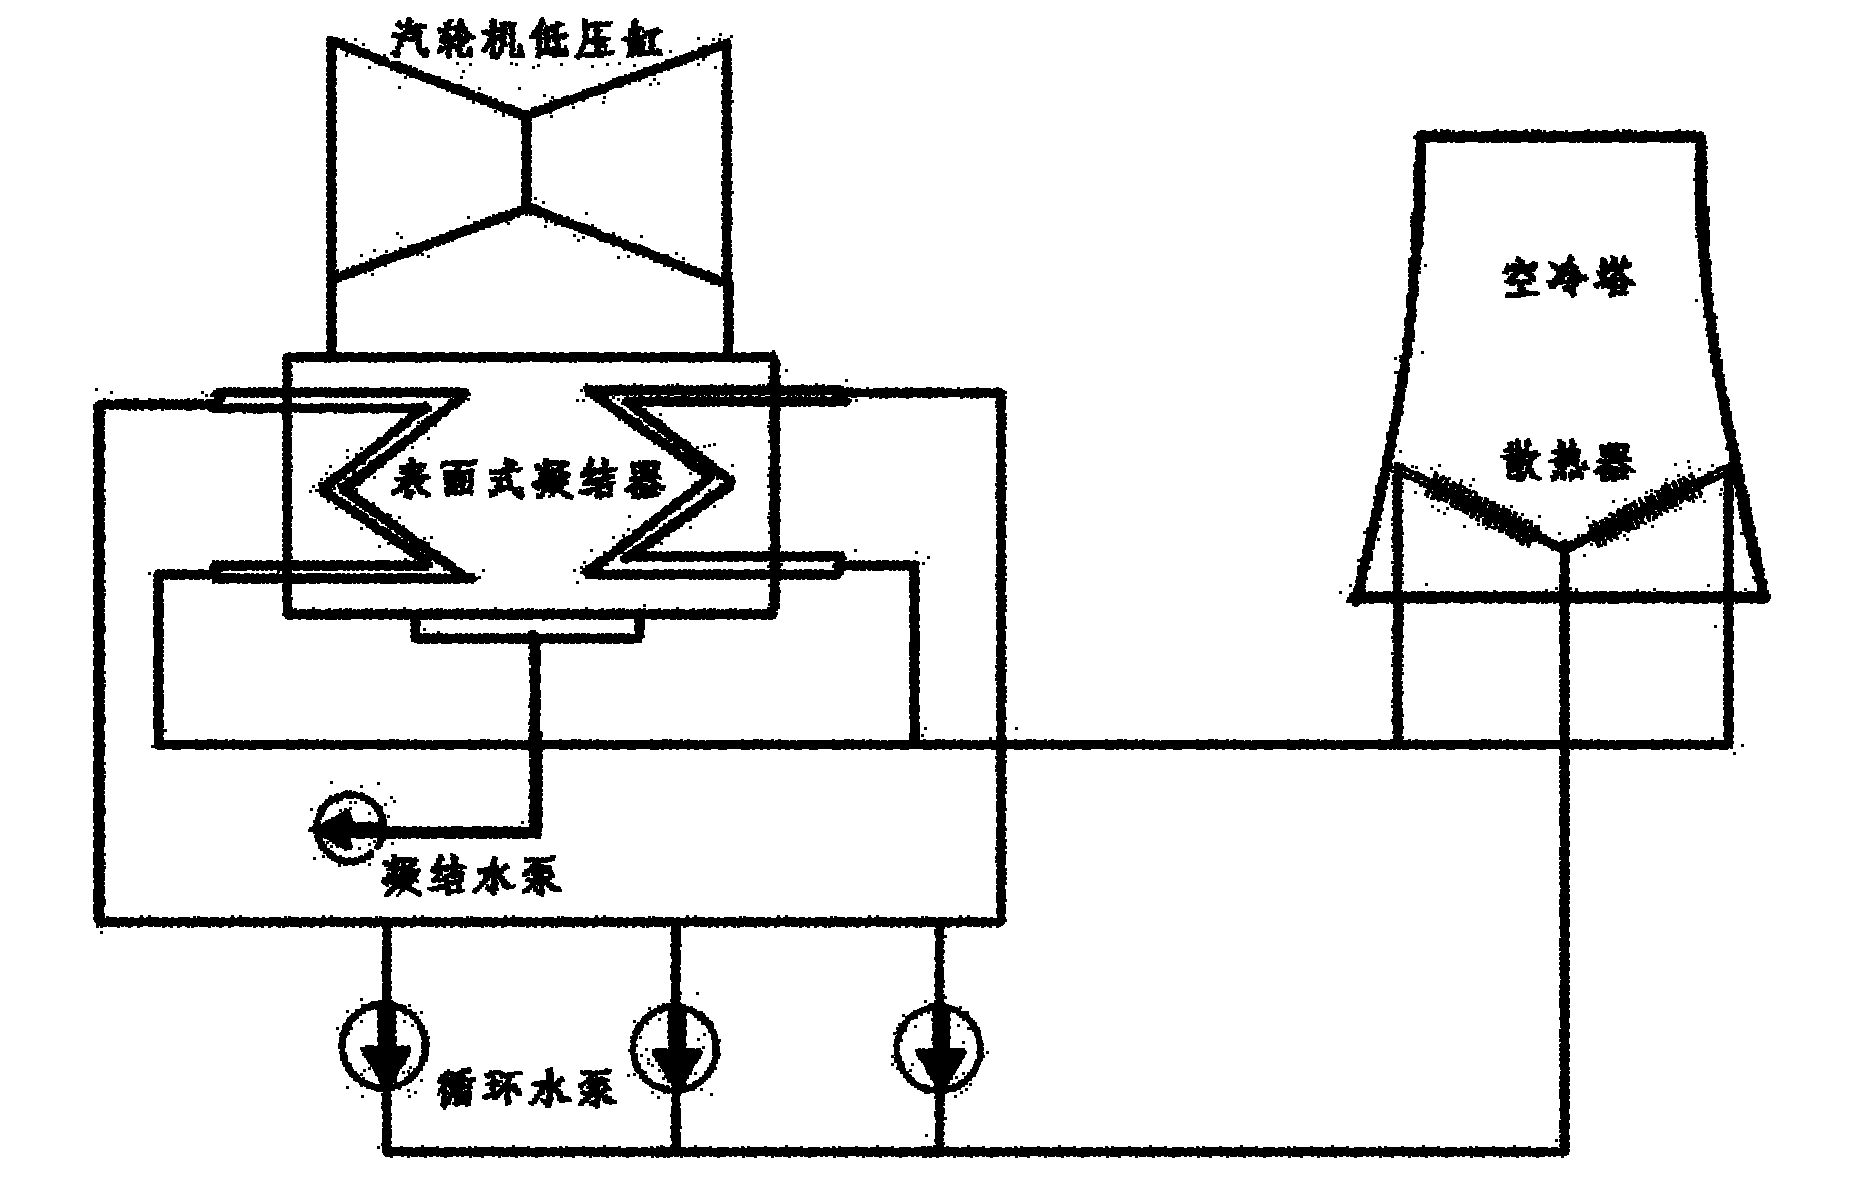 Indirect air-cooling control system of surface condenser